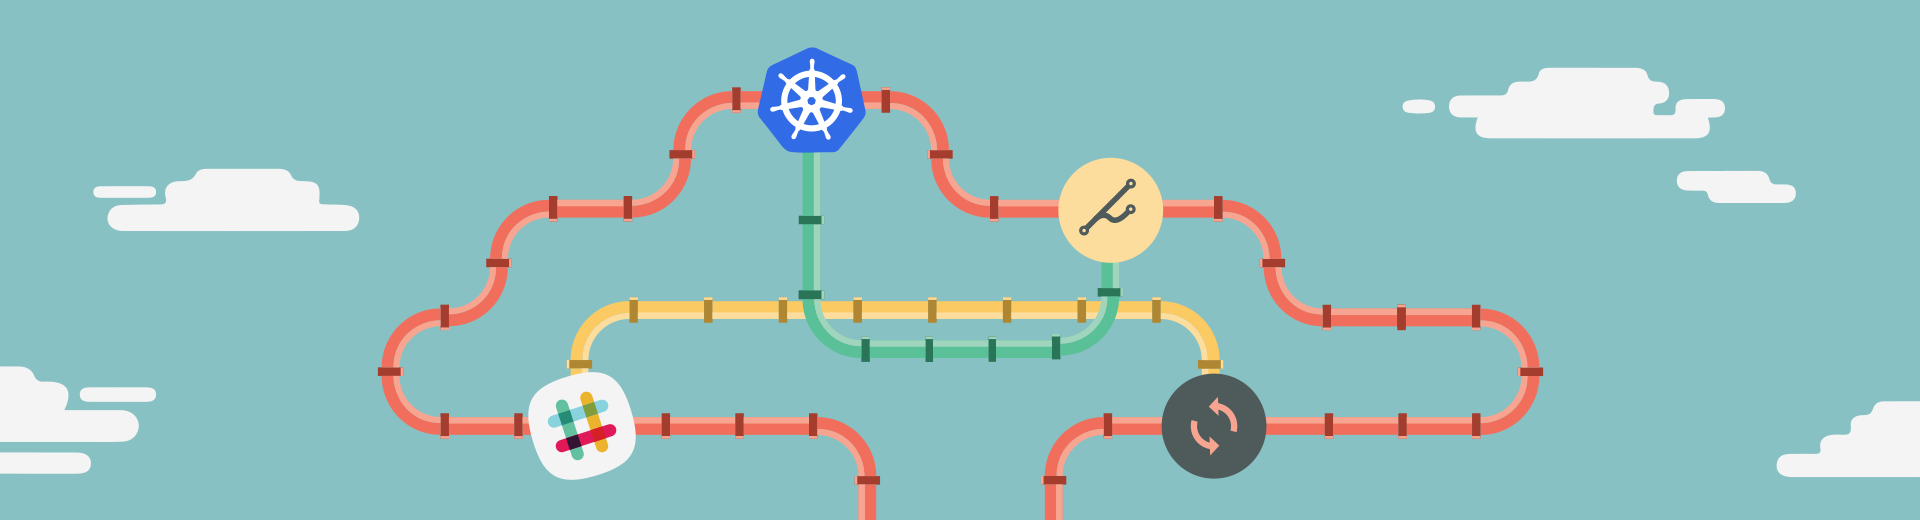 Some clouds and a series of intersecting pipes, with Kubernetes and other tech logos